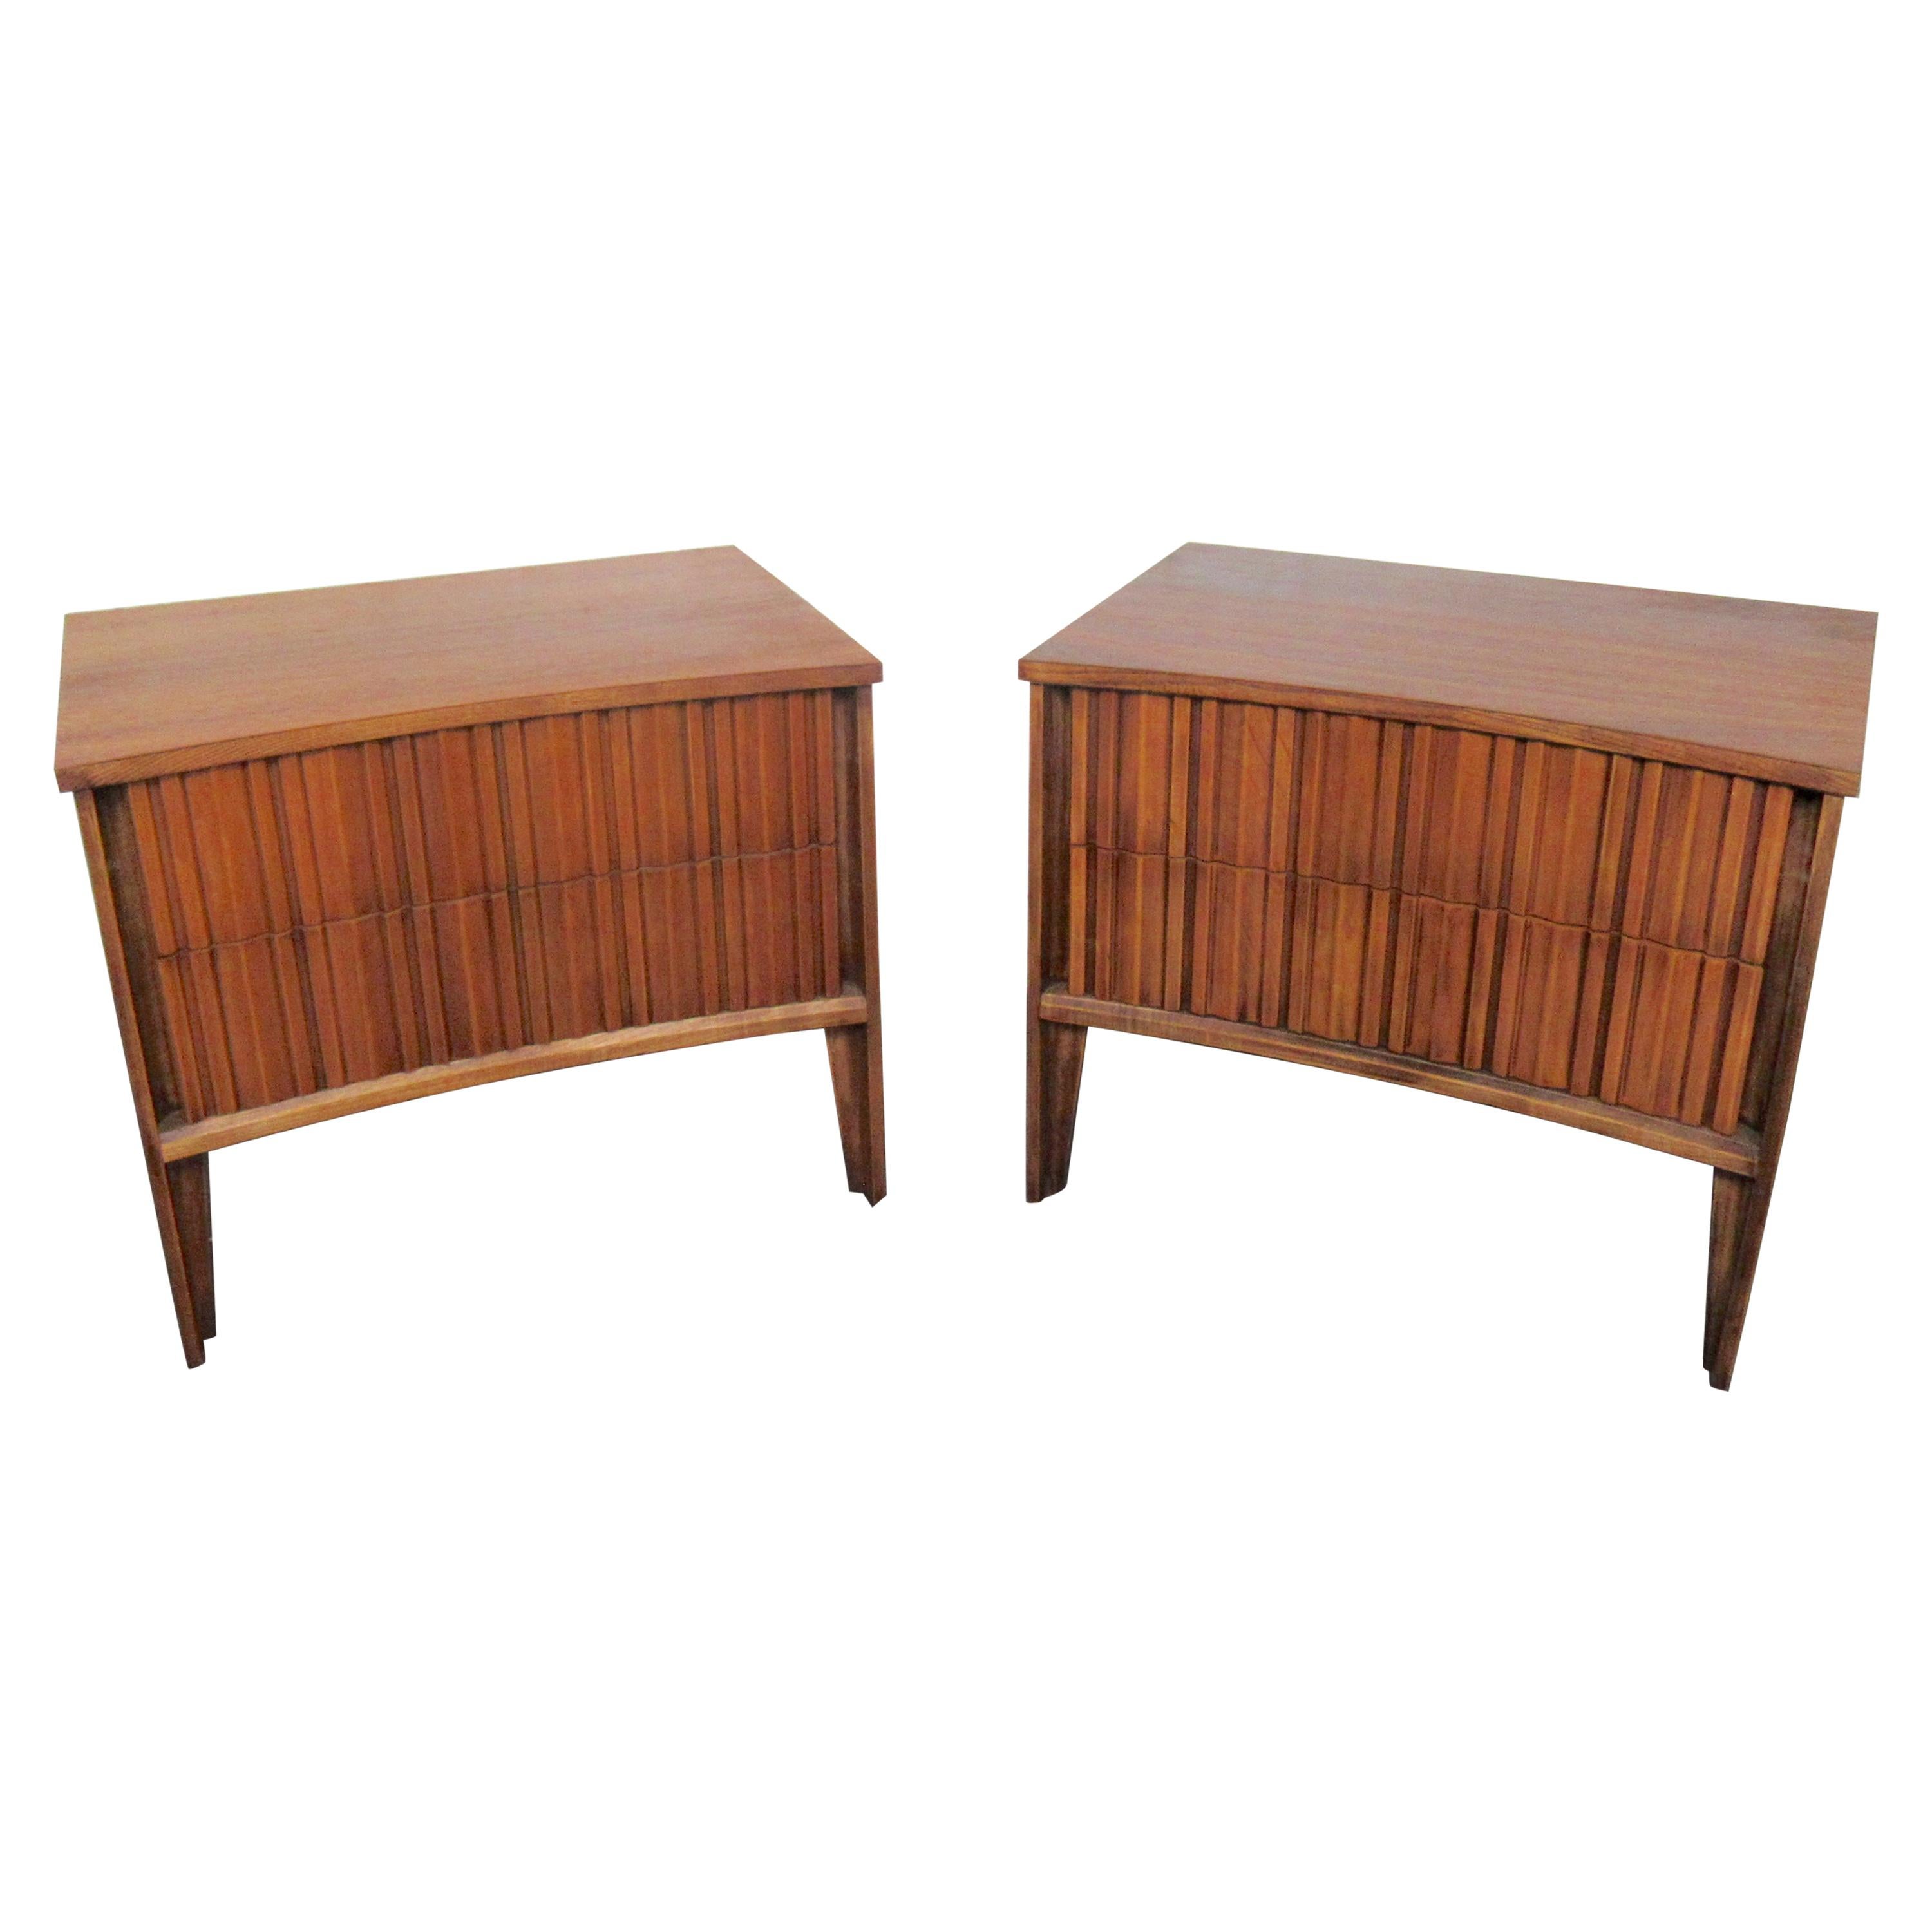 Pair of Walnut Night Stands by Strata for Unagusta